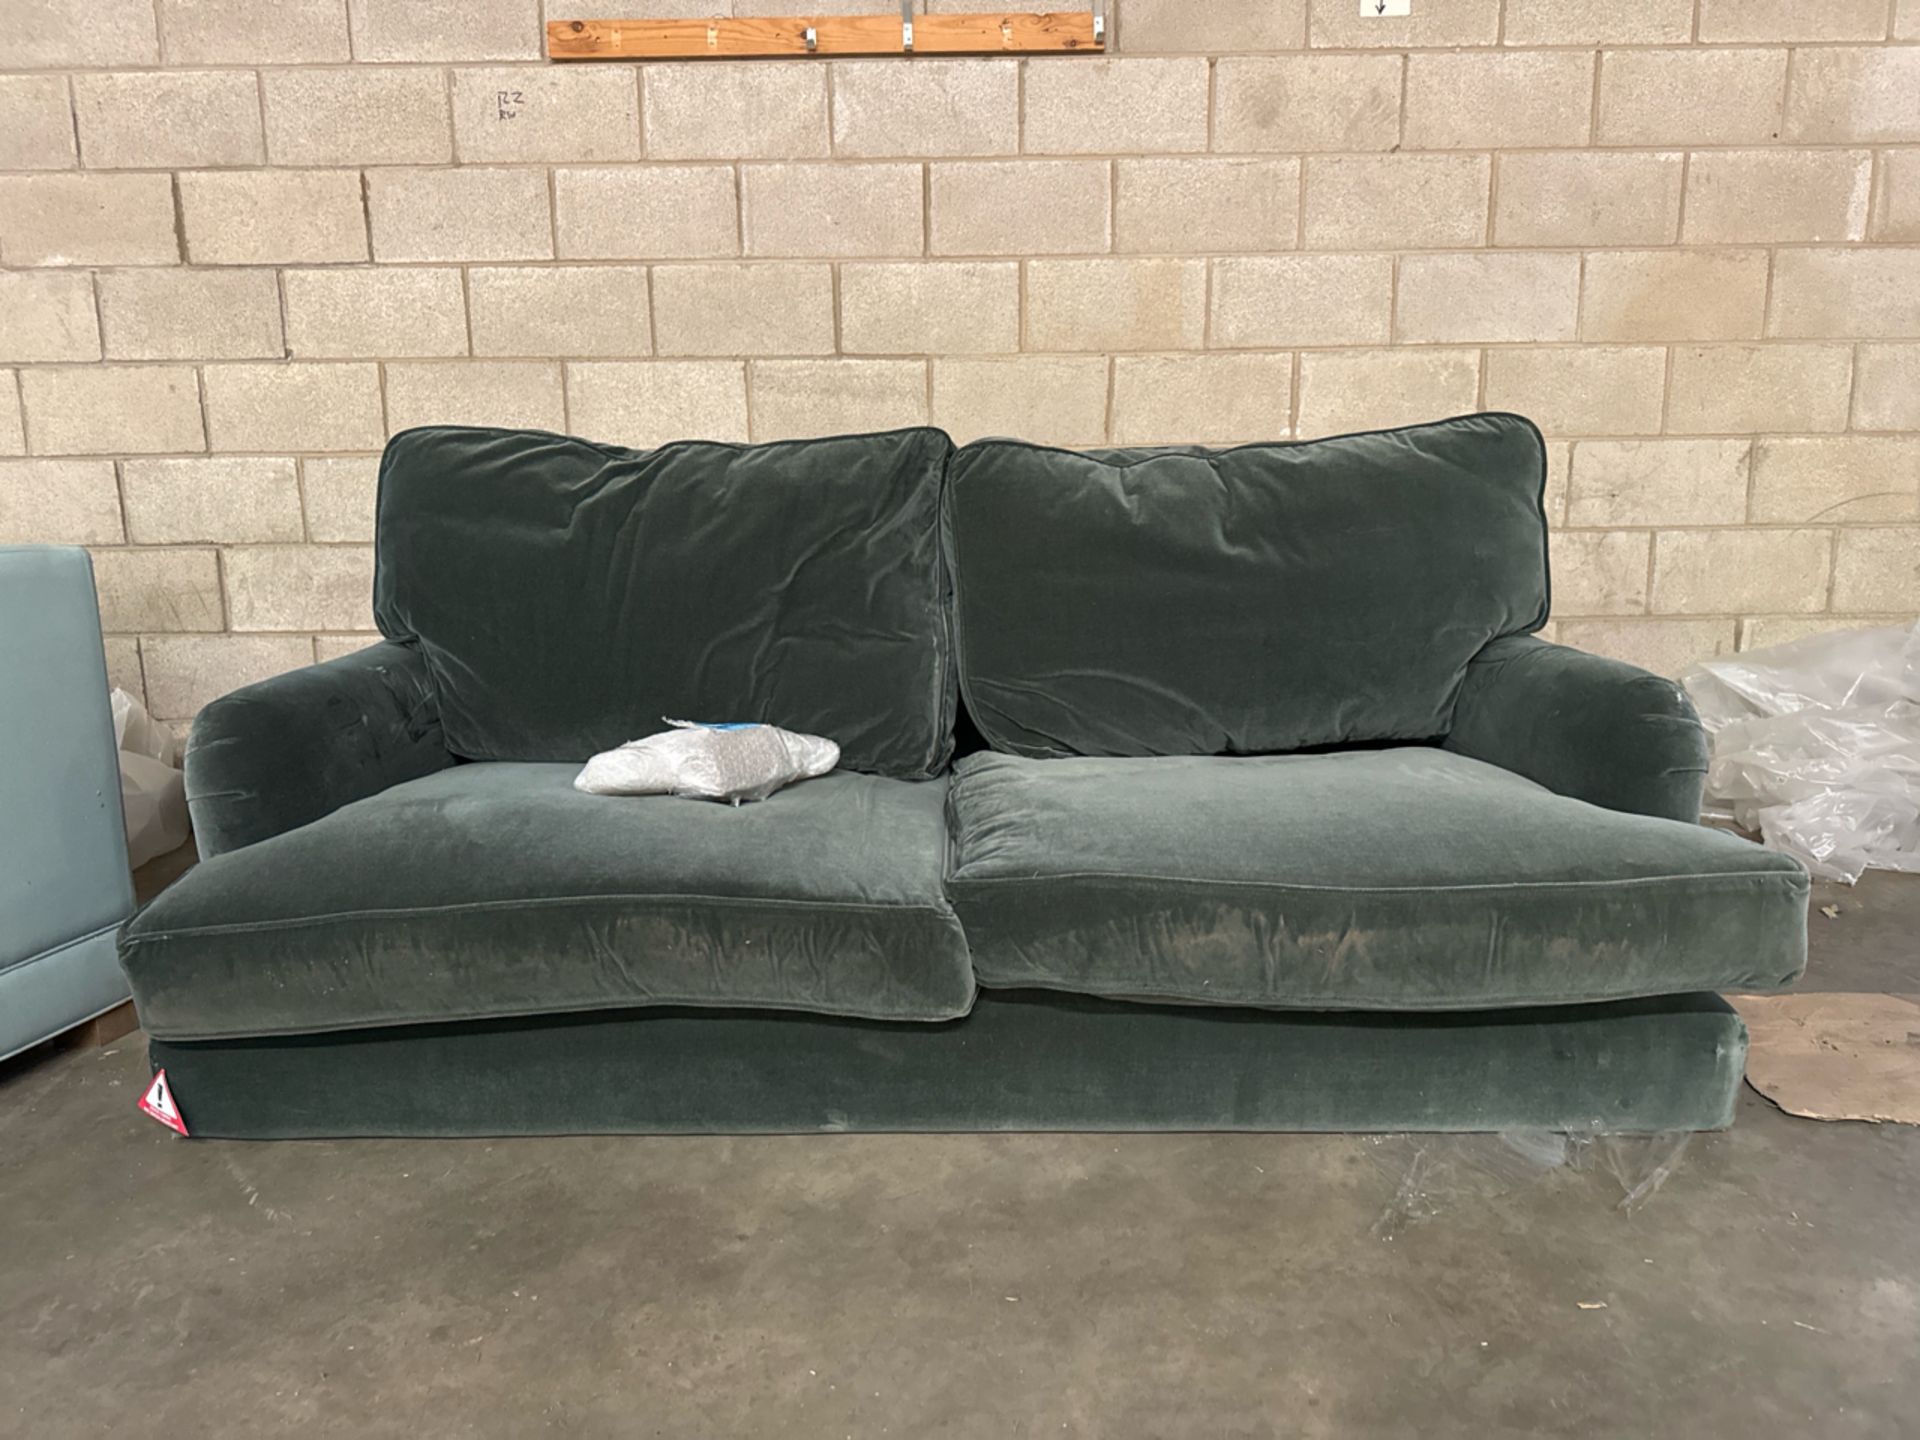 Bluebell 2.5 Seat Sofa In Smokey Green Cashmere Velvet RRP - £3500 - Image 2 of 6